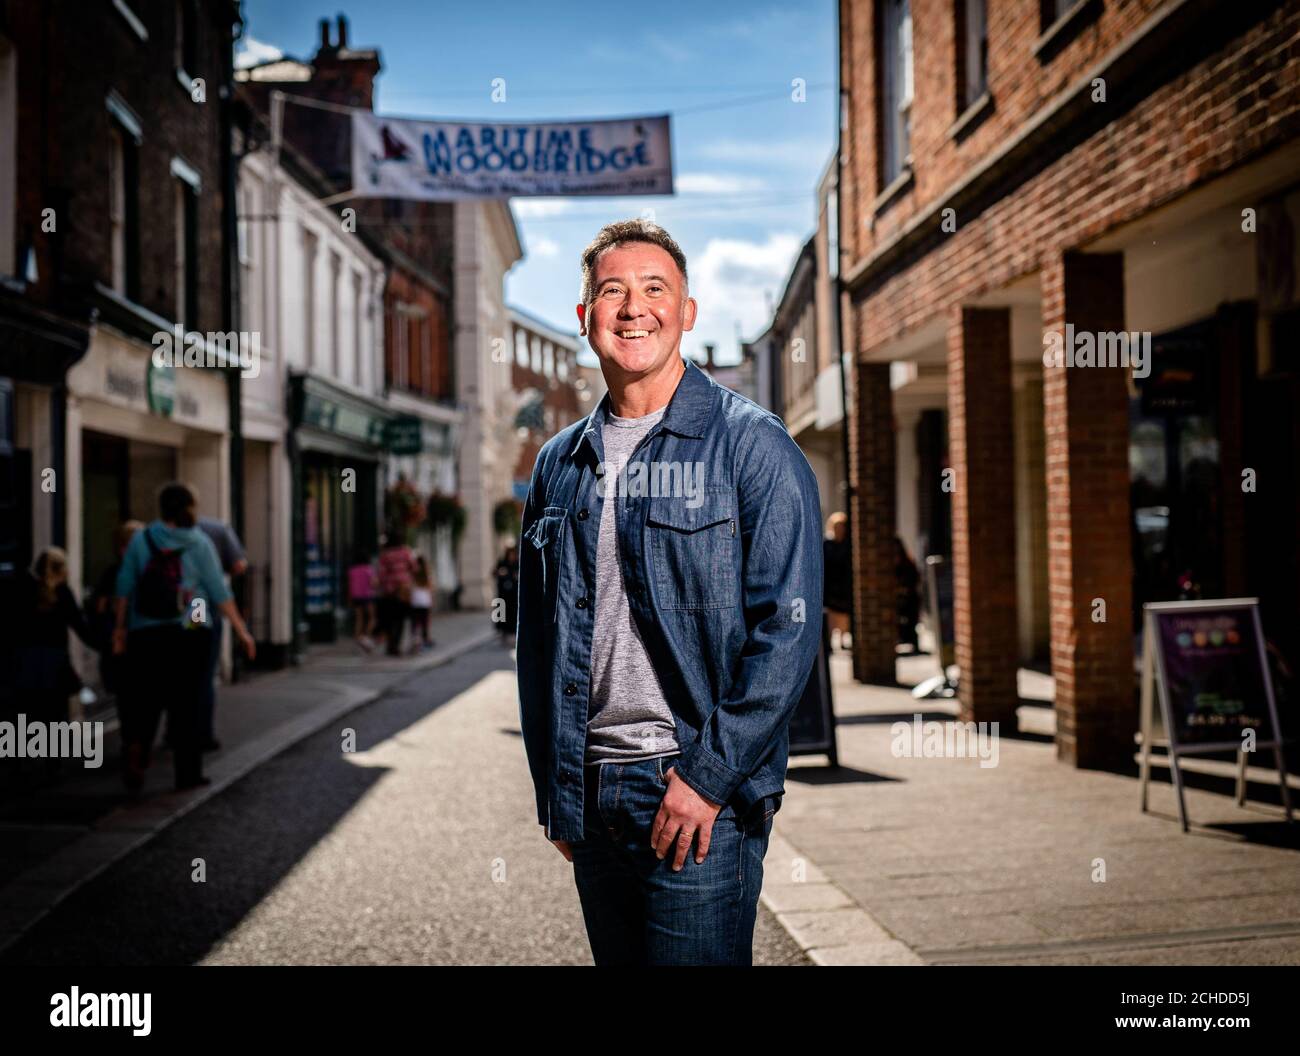 Tony Moorcroft representing The Thoroughfare, Woodbridge, one of the 38 high streets shortlisted in the Great British High Street Awards 2018, which is sponsored by Visa and being run by the Ministry of Housing, Communities & Local Government. Stock Photo